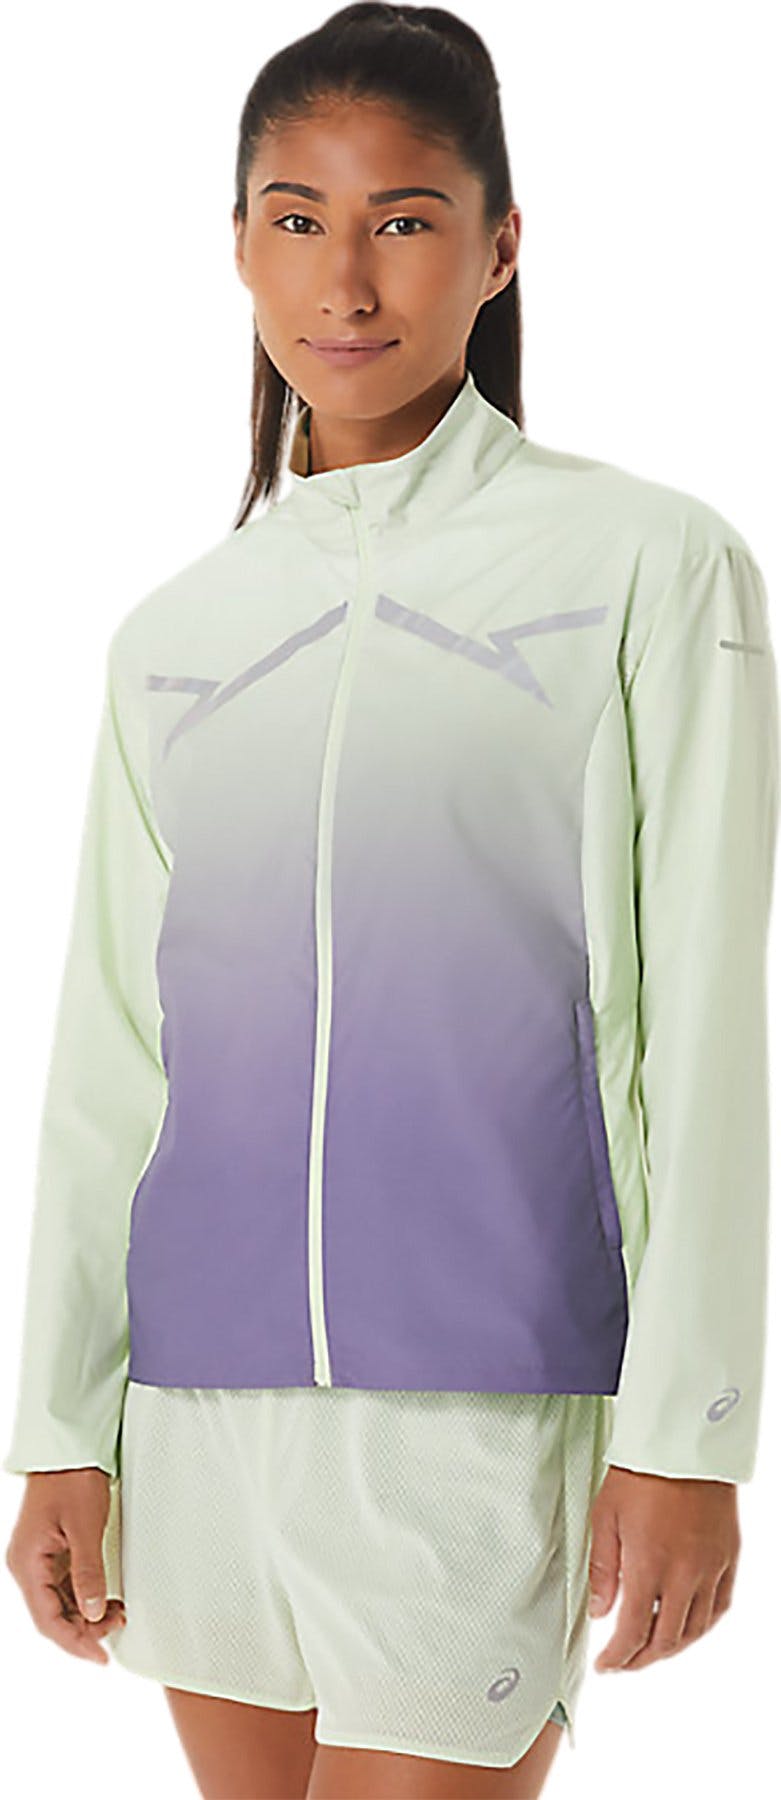 Product image for Lite-Show Jacket - Women's